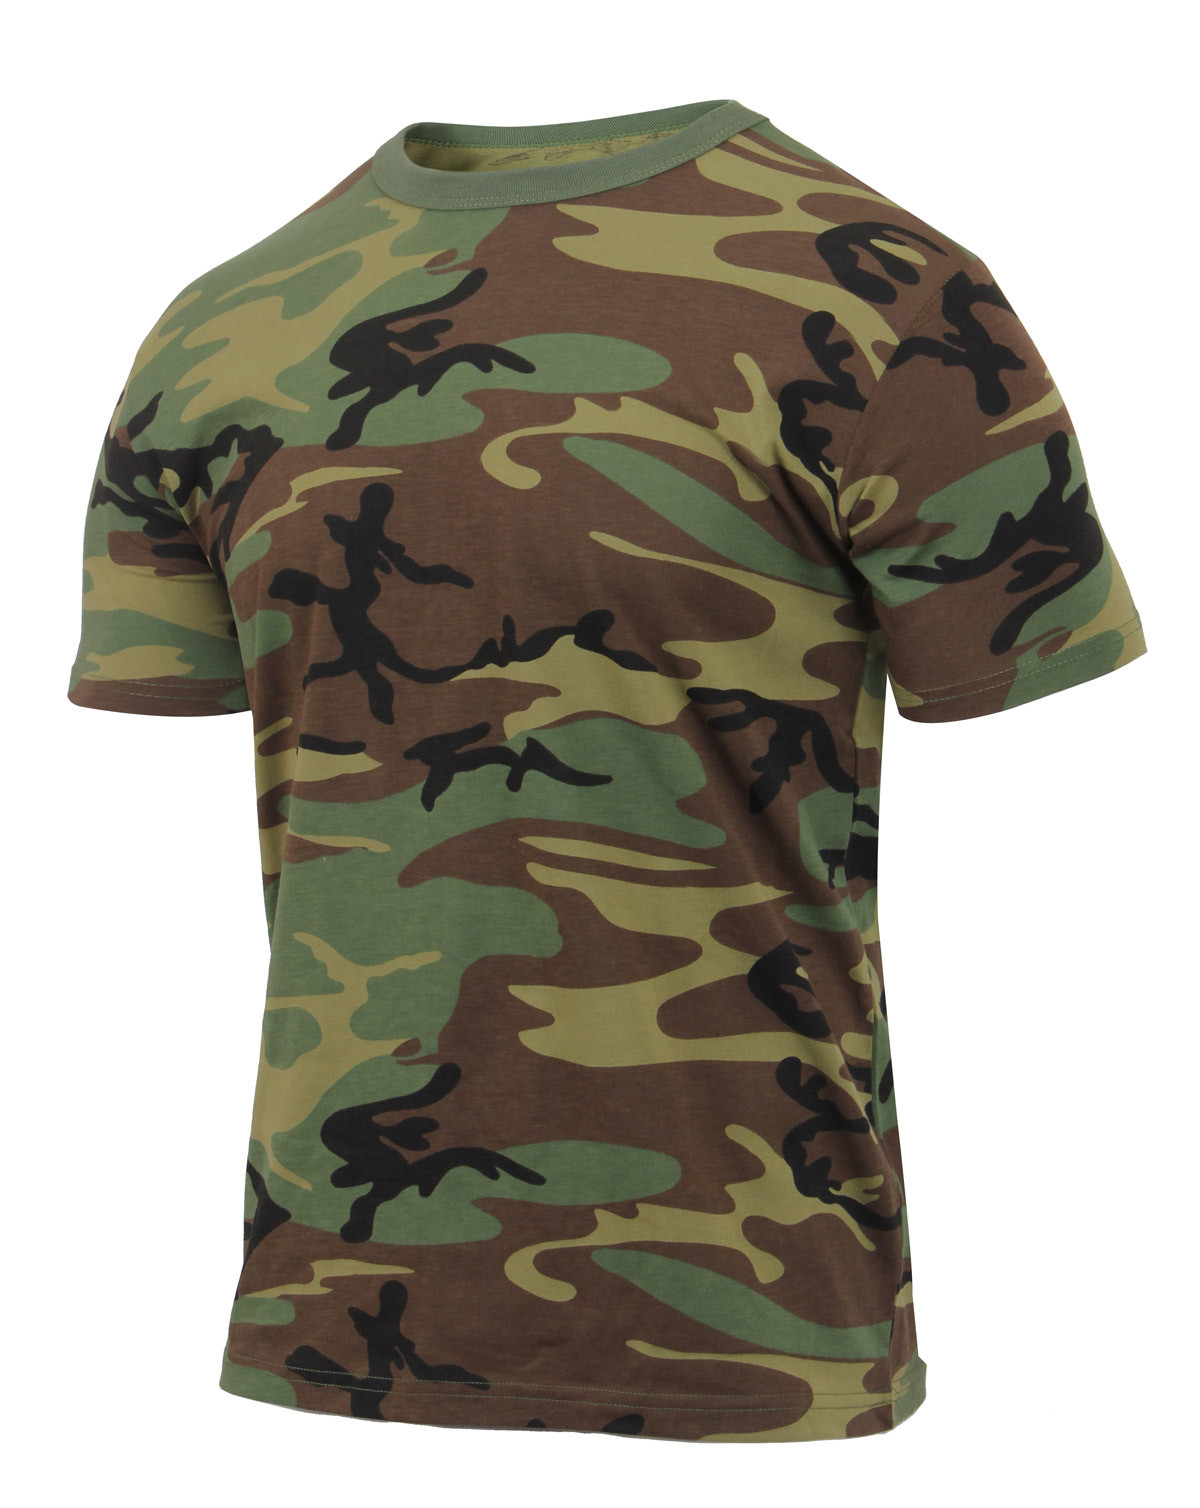 Rothco Camouflage T-Shirt, Athletic Fit (Woodland, XL)